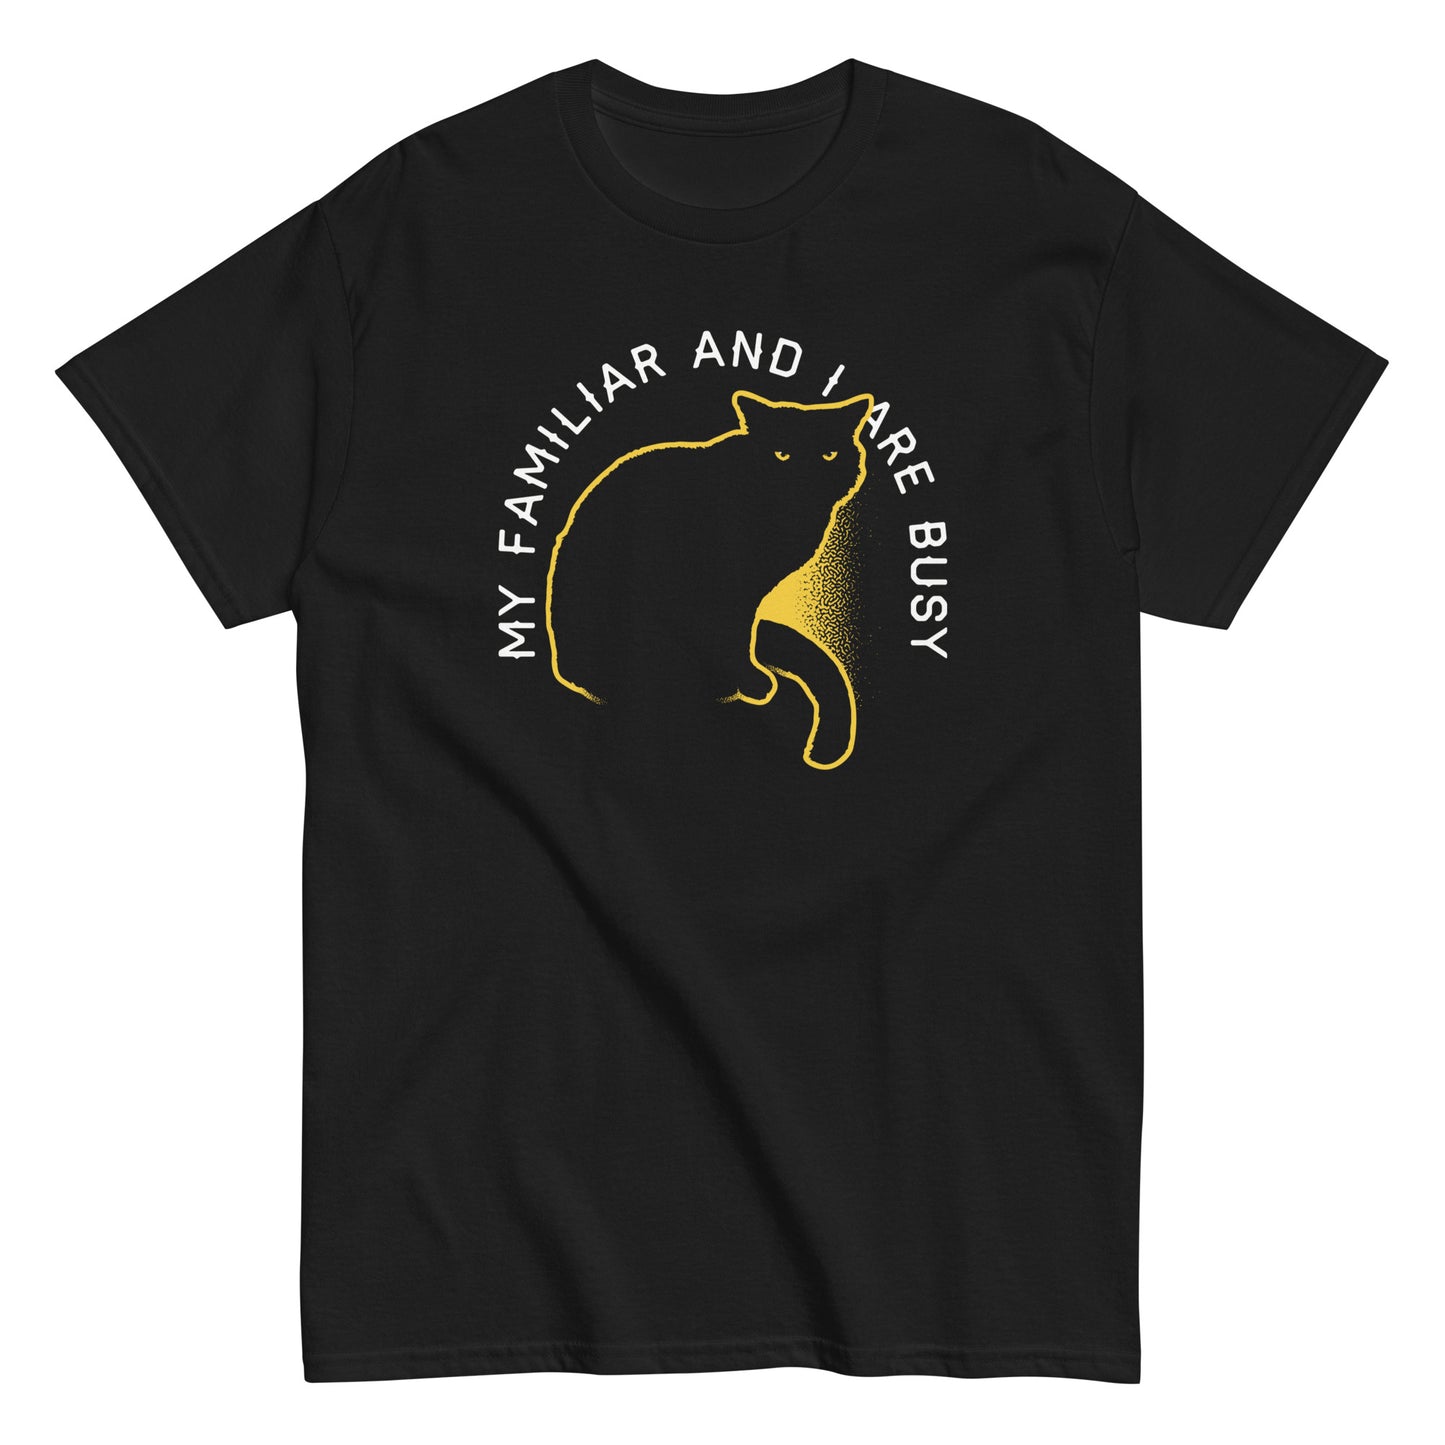 My Familiar And I Are Busy Men's Classic Tee